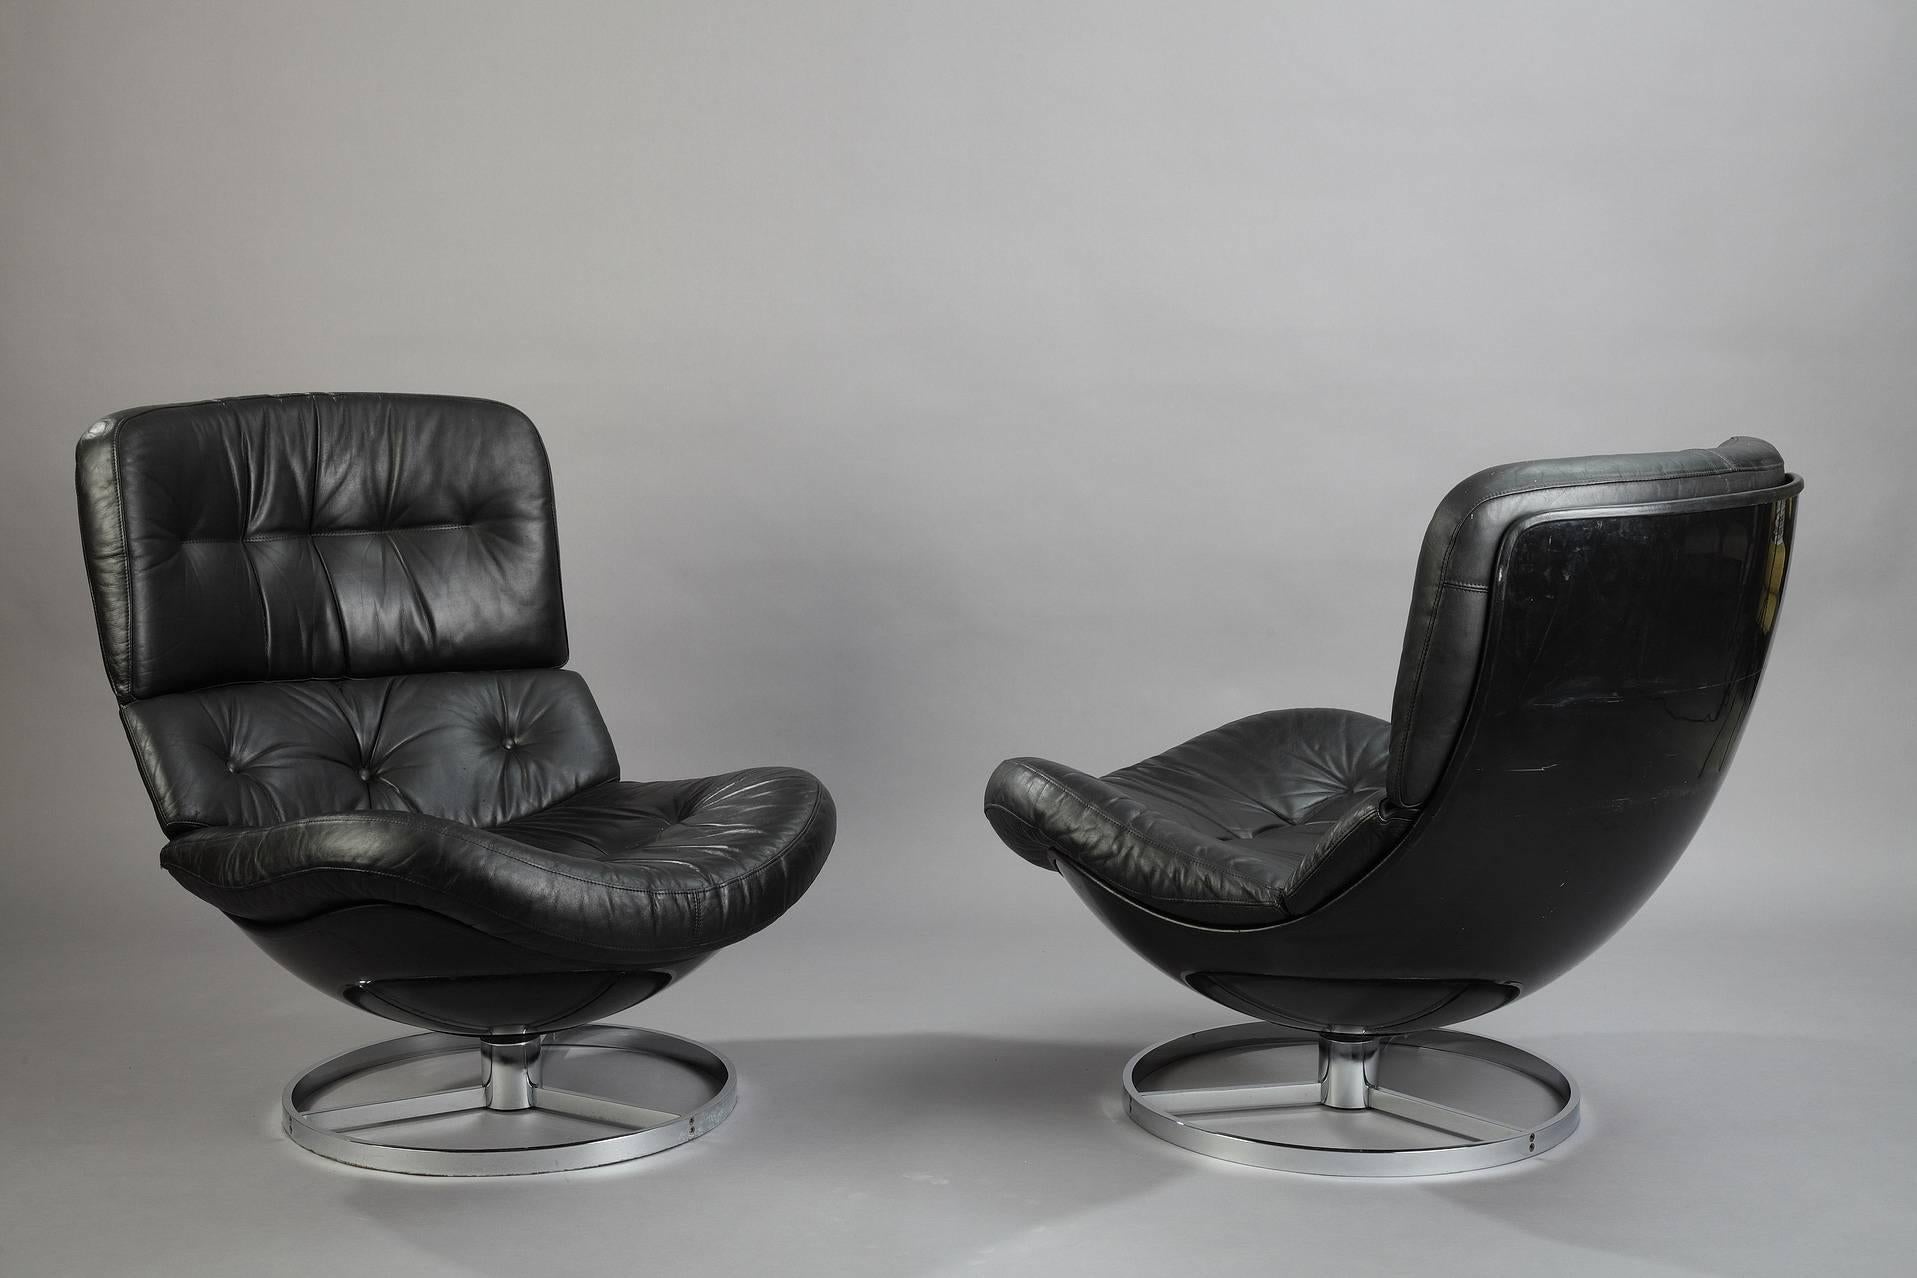 Set of two swivel armchairs and ottoman with comfortable seating, in fiberglass and soft black leather upholstery, with chrome-plated metal circular base. Removable back and seat cushions. Manufactured in the 1970s. Some wear to the